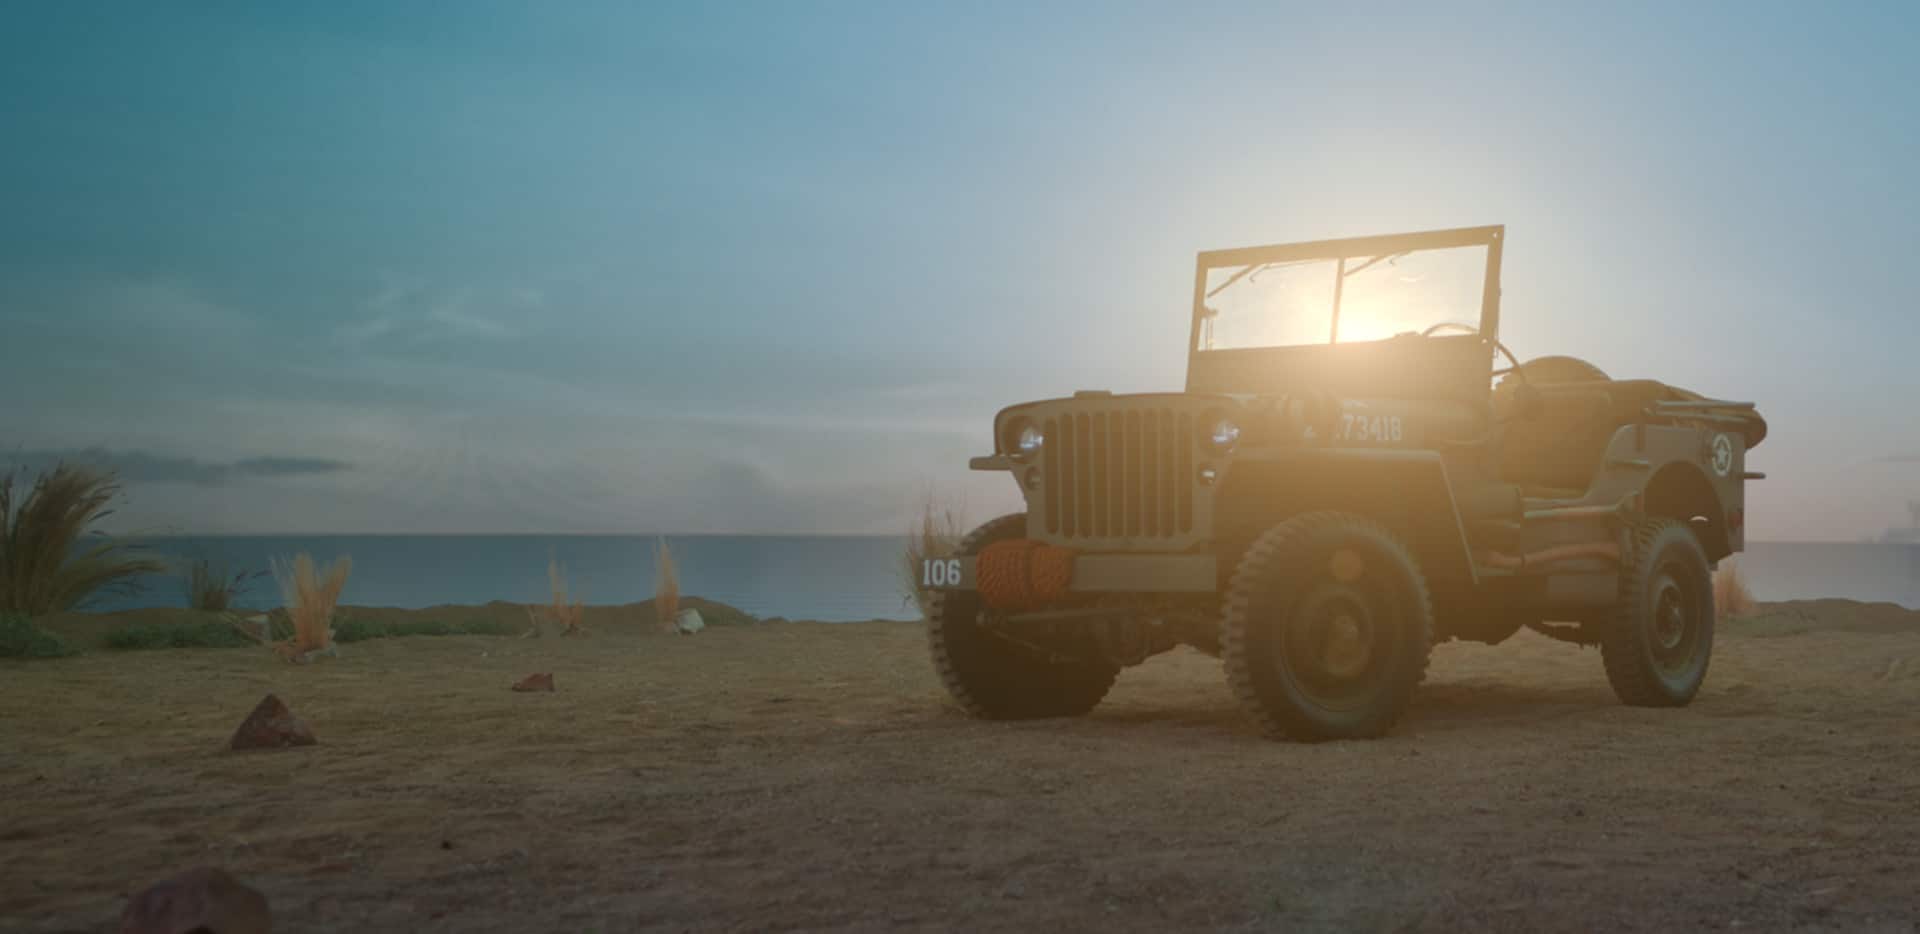 A vintage Willys MB model parked on a sandy beach.